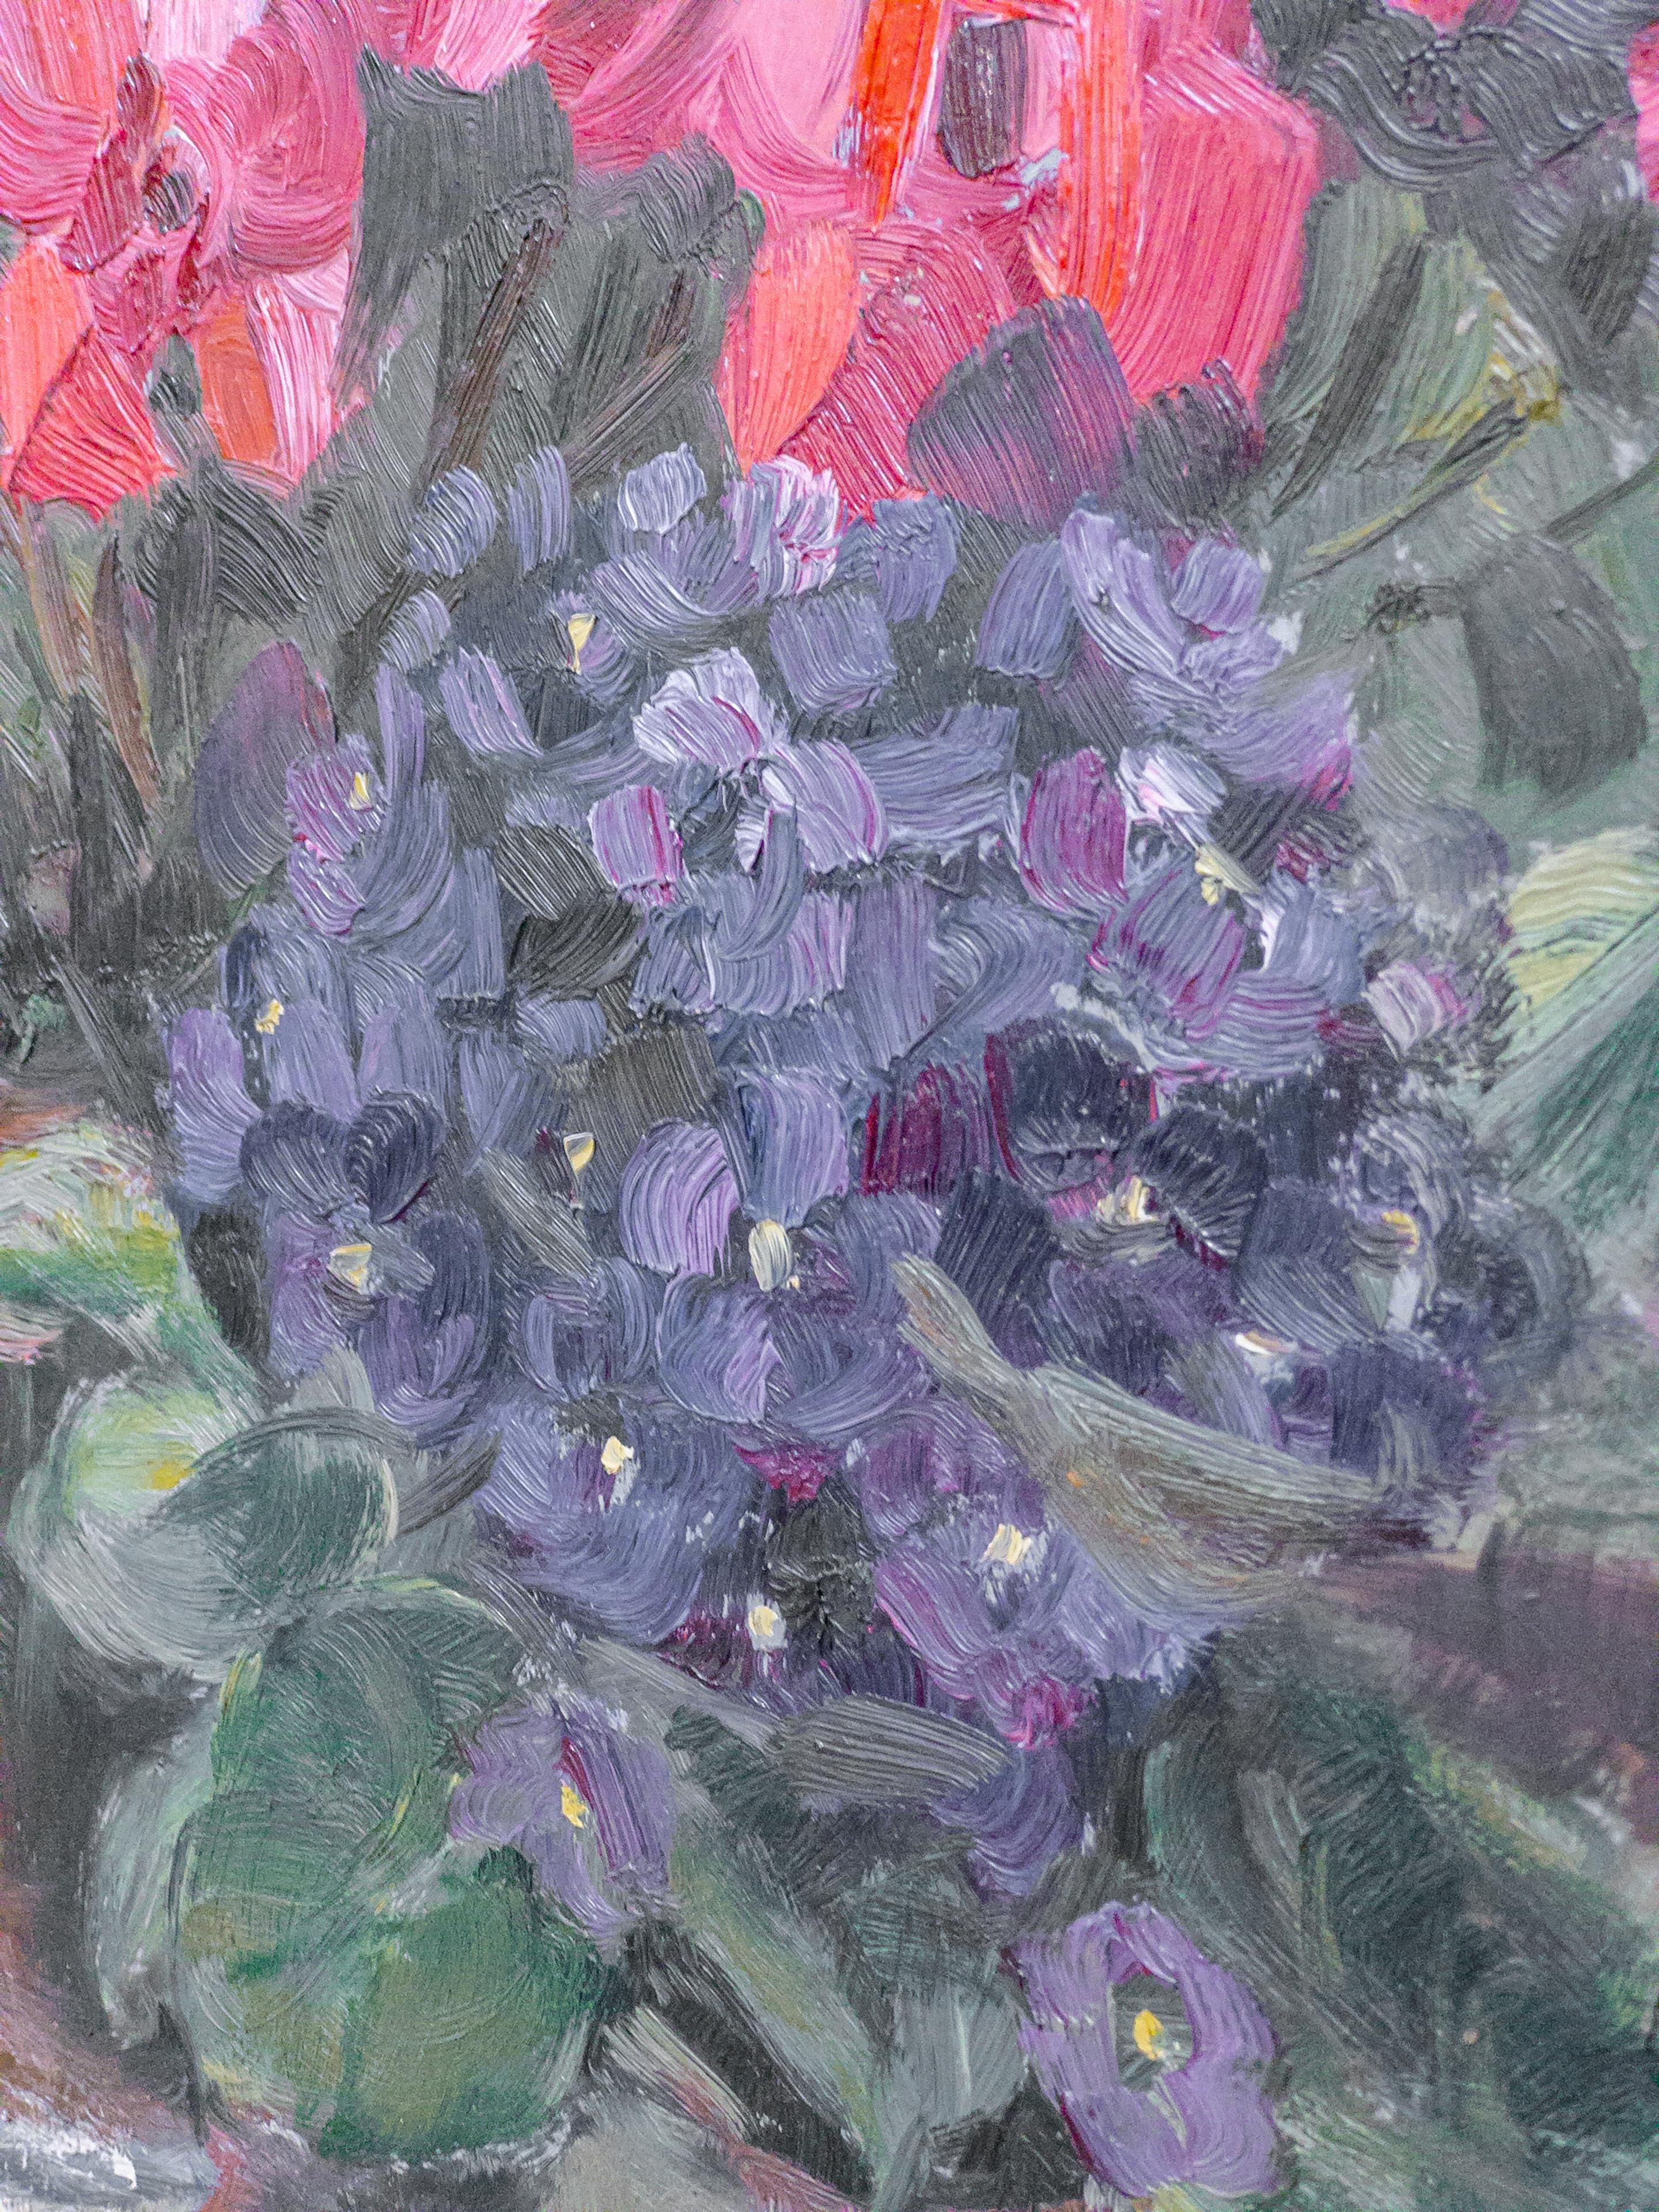 French Oil Painting on Canvas of Violets In Good Condition For Sale In Houston, TX